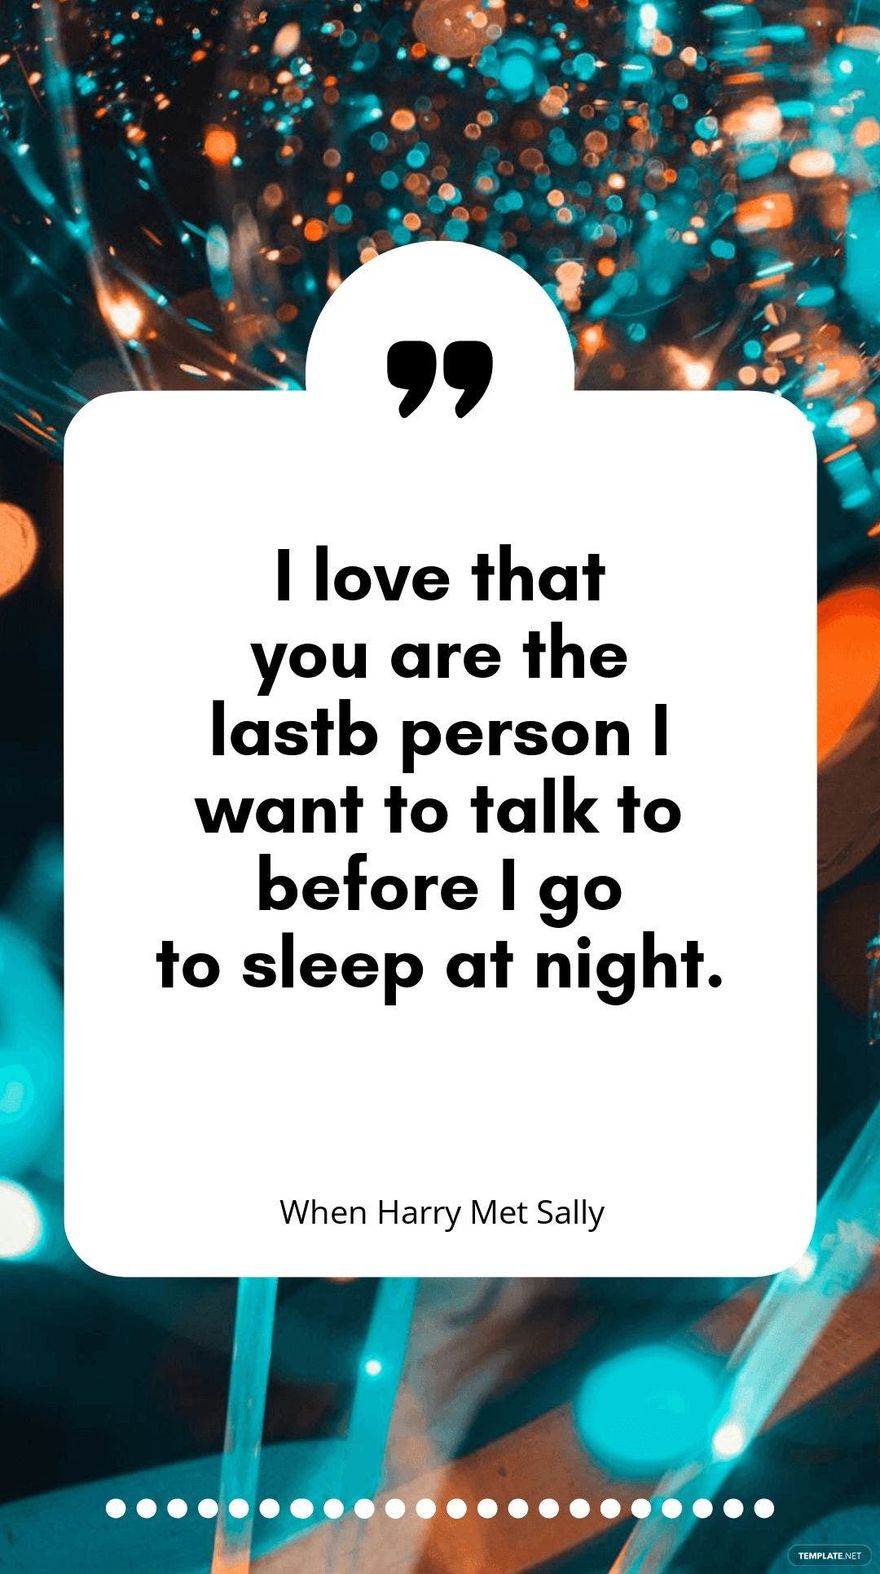 When Harry Met Sally - ”I love that you are the last person I want to talk to before I go to sleep at night.” 